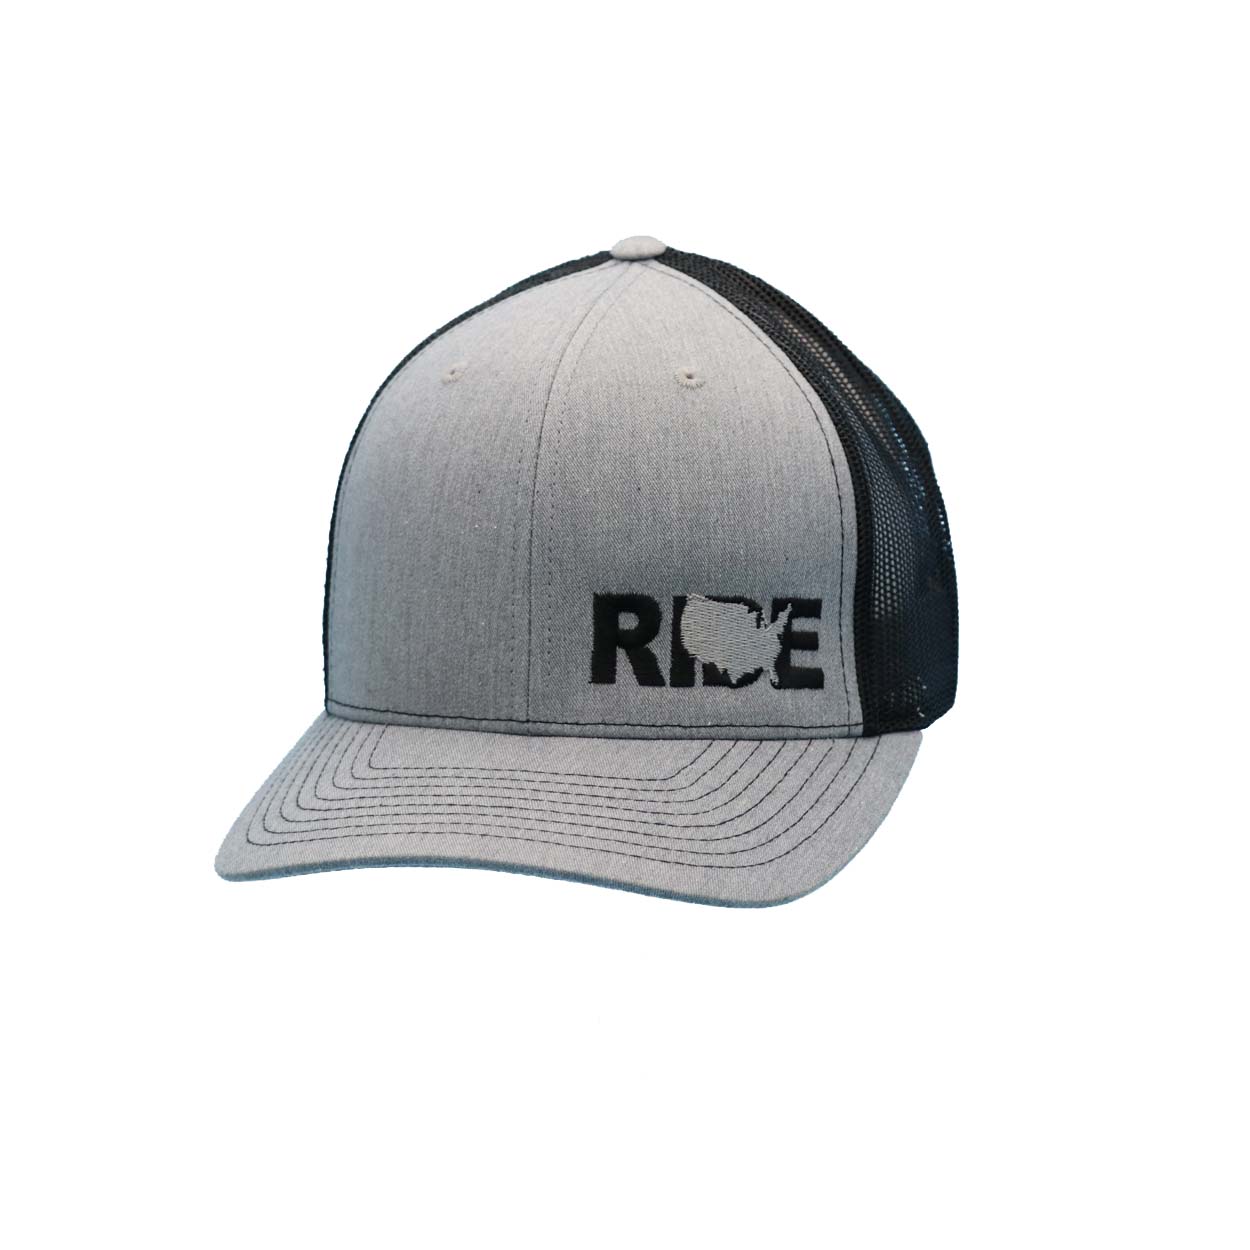 Ride United States Night Out Pro Embroidered Snapback Trucker Hat Heather Gray/Black